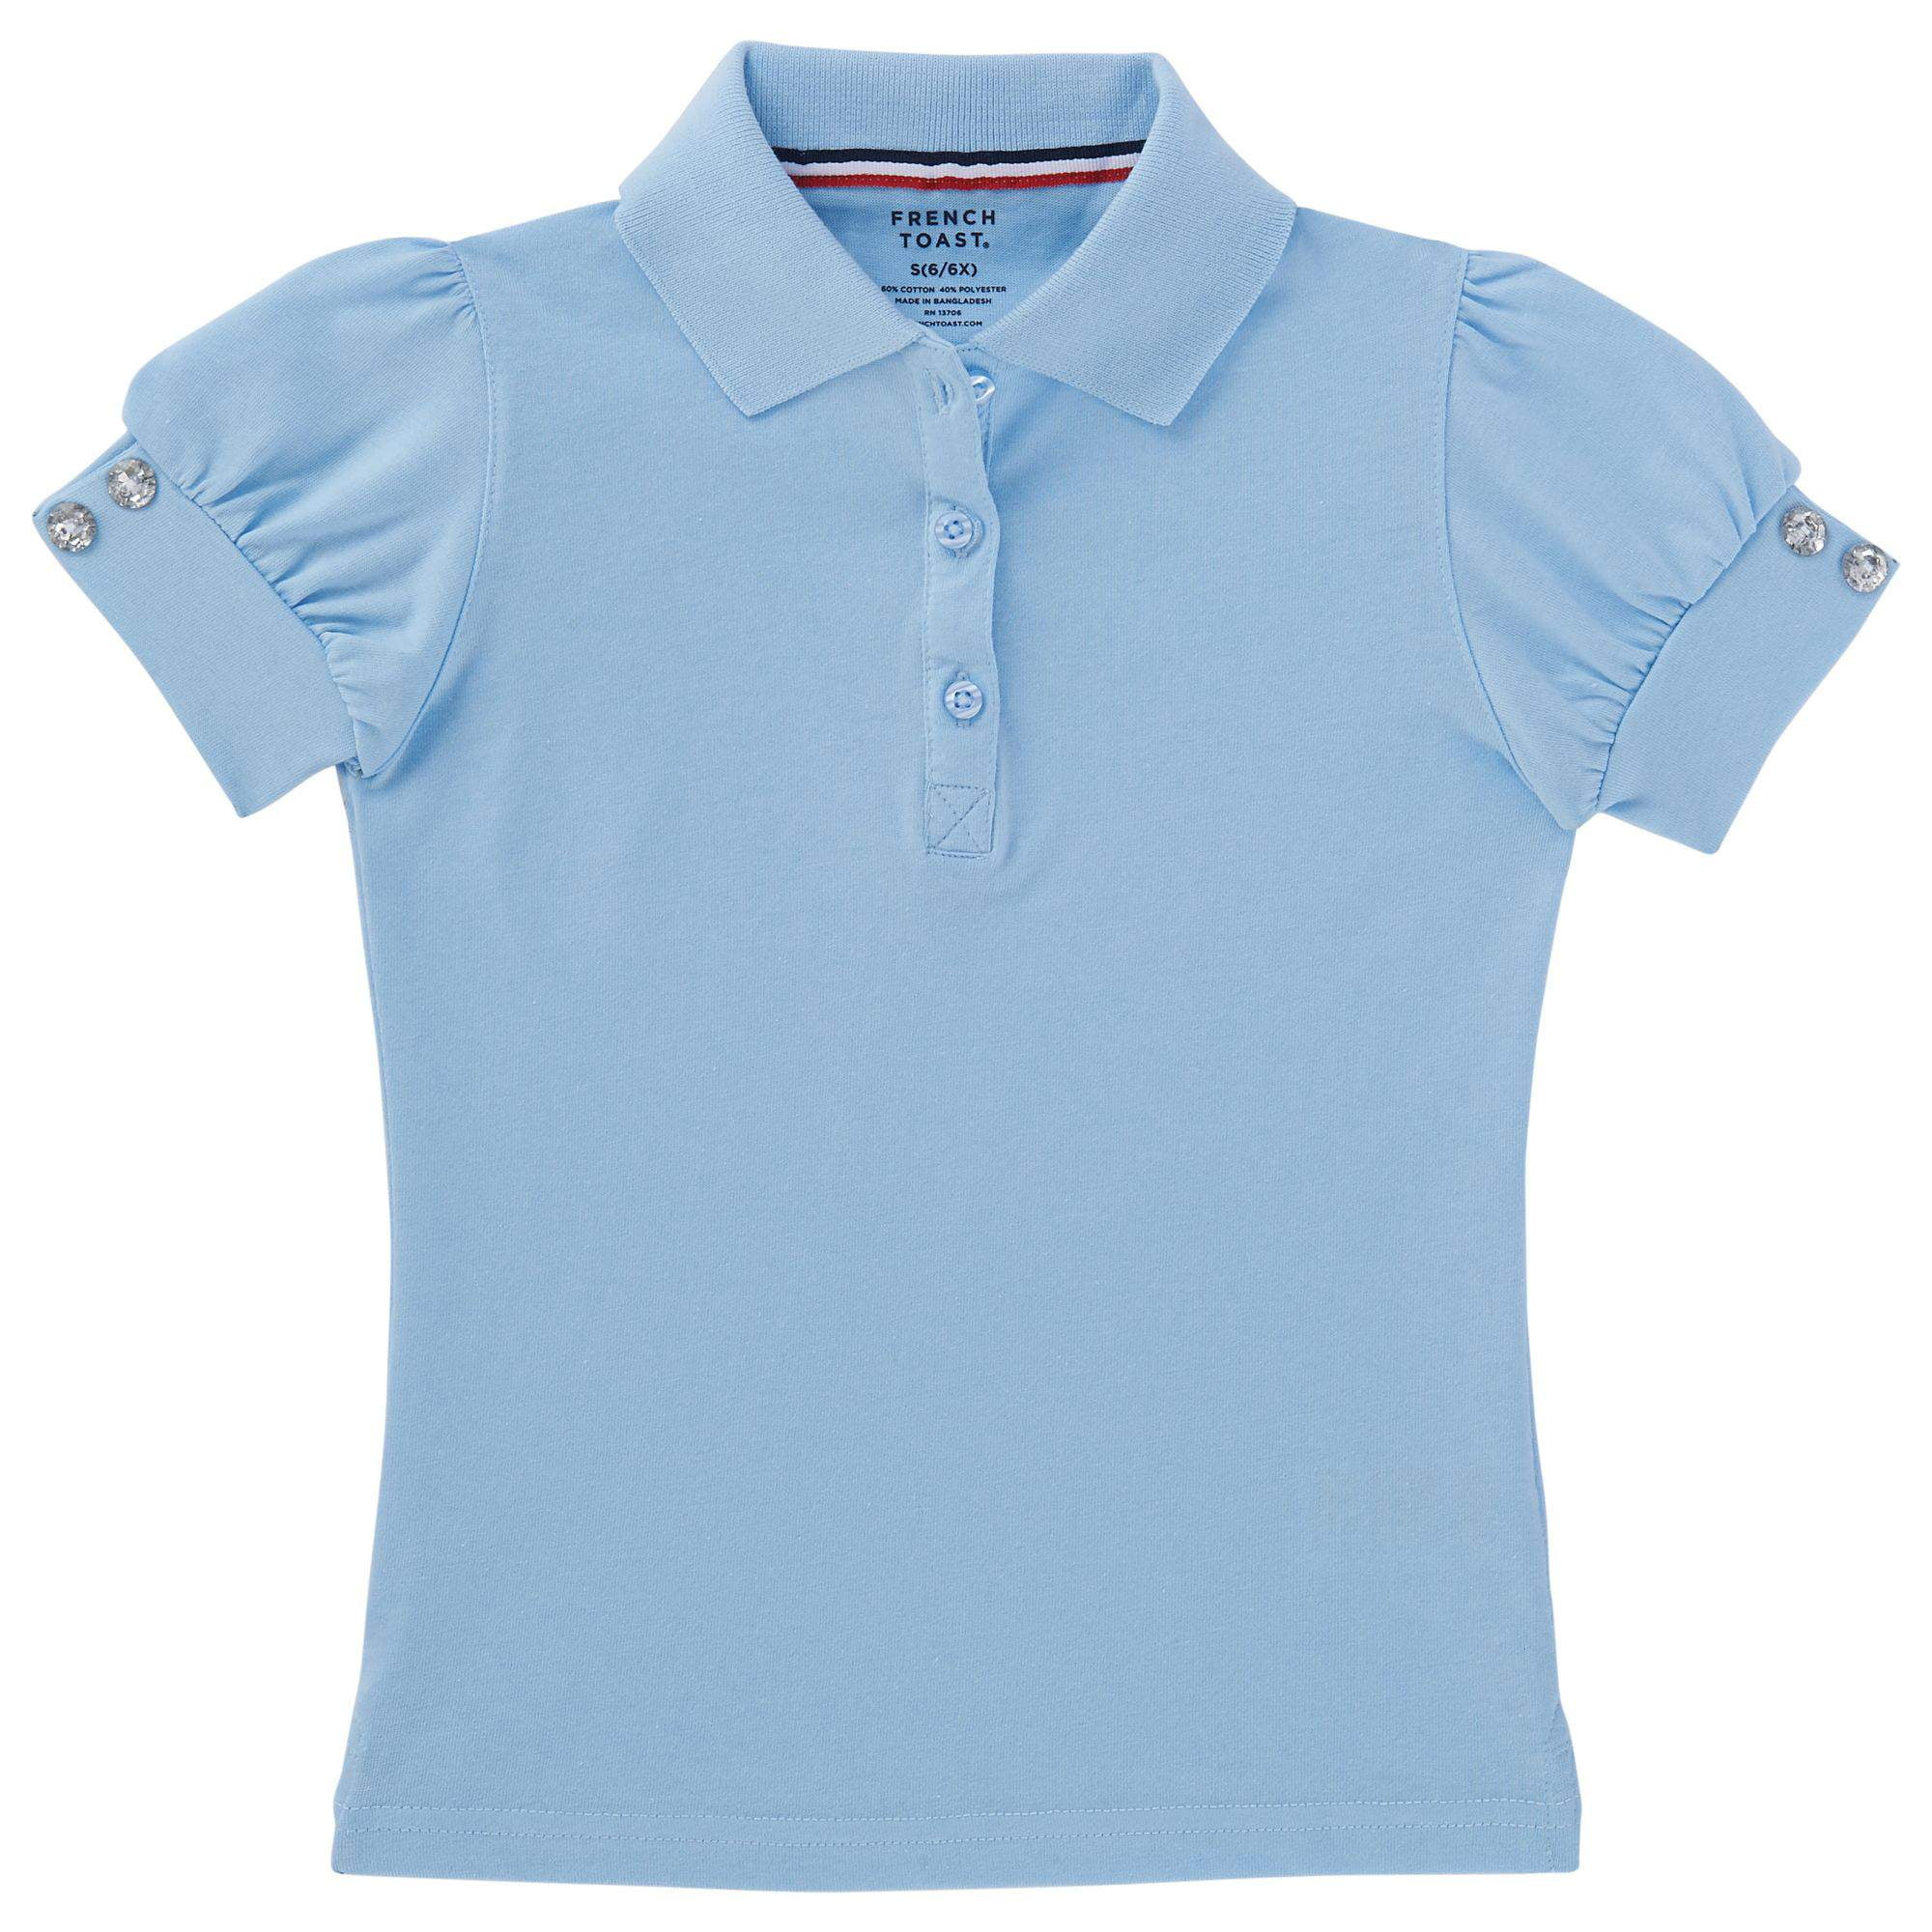 Standard & Plus French Toast Girls Short Sleeve Stretch Pique Polo Shirt 